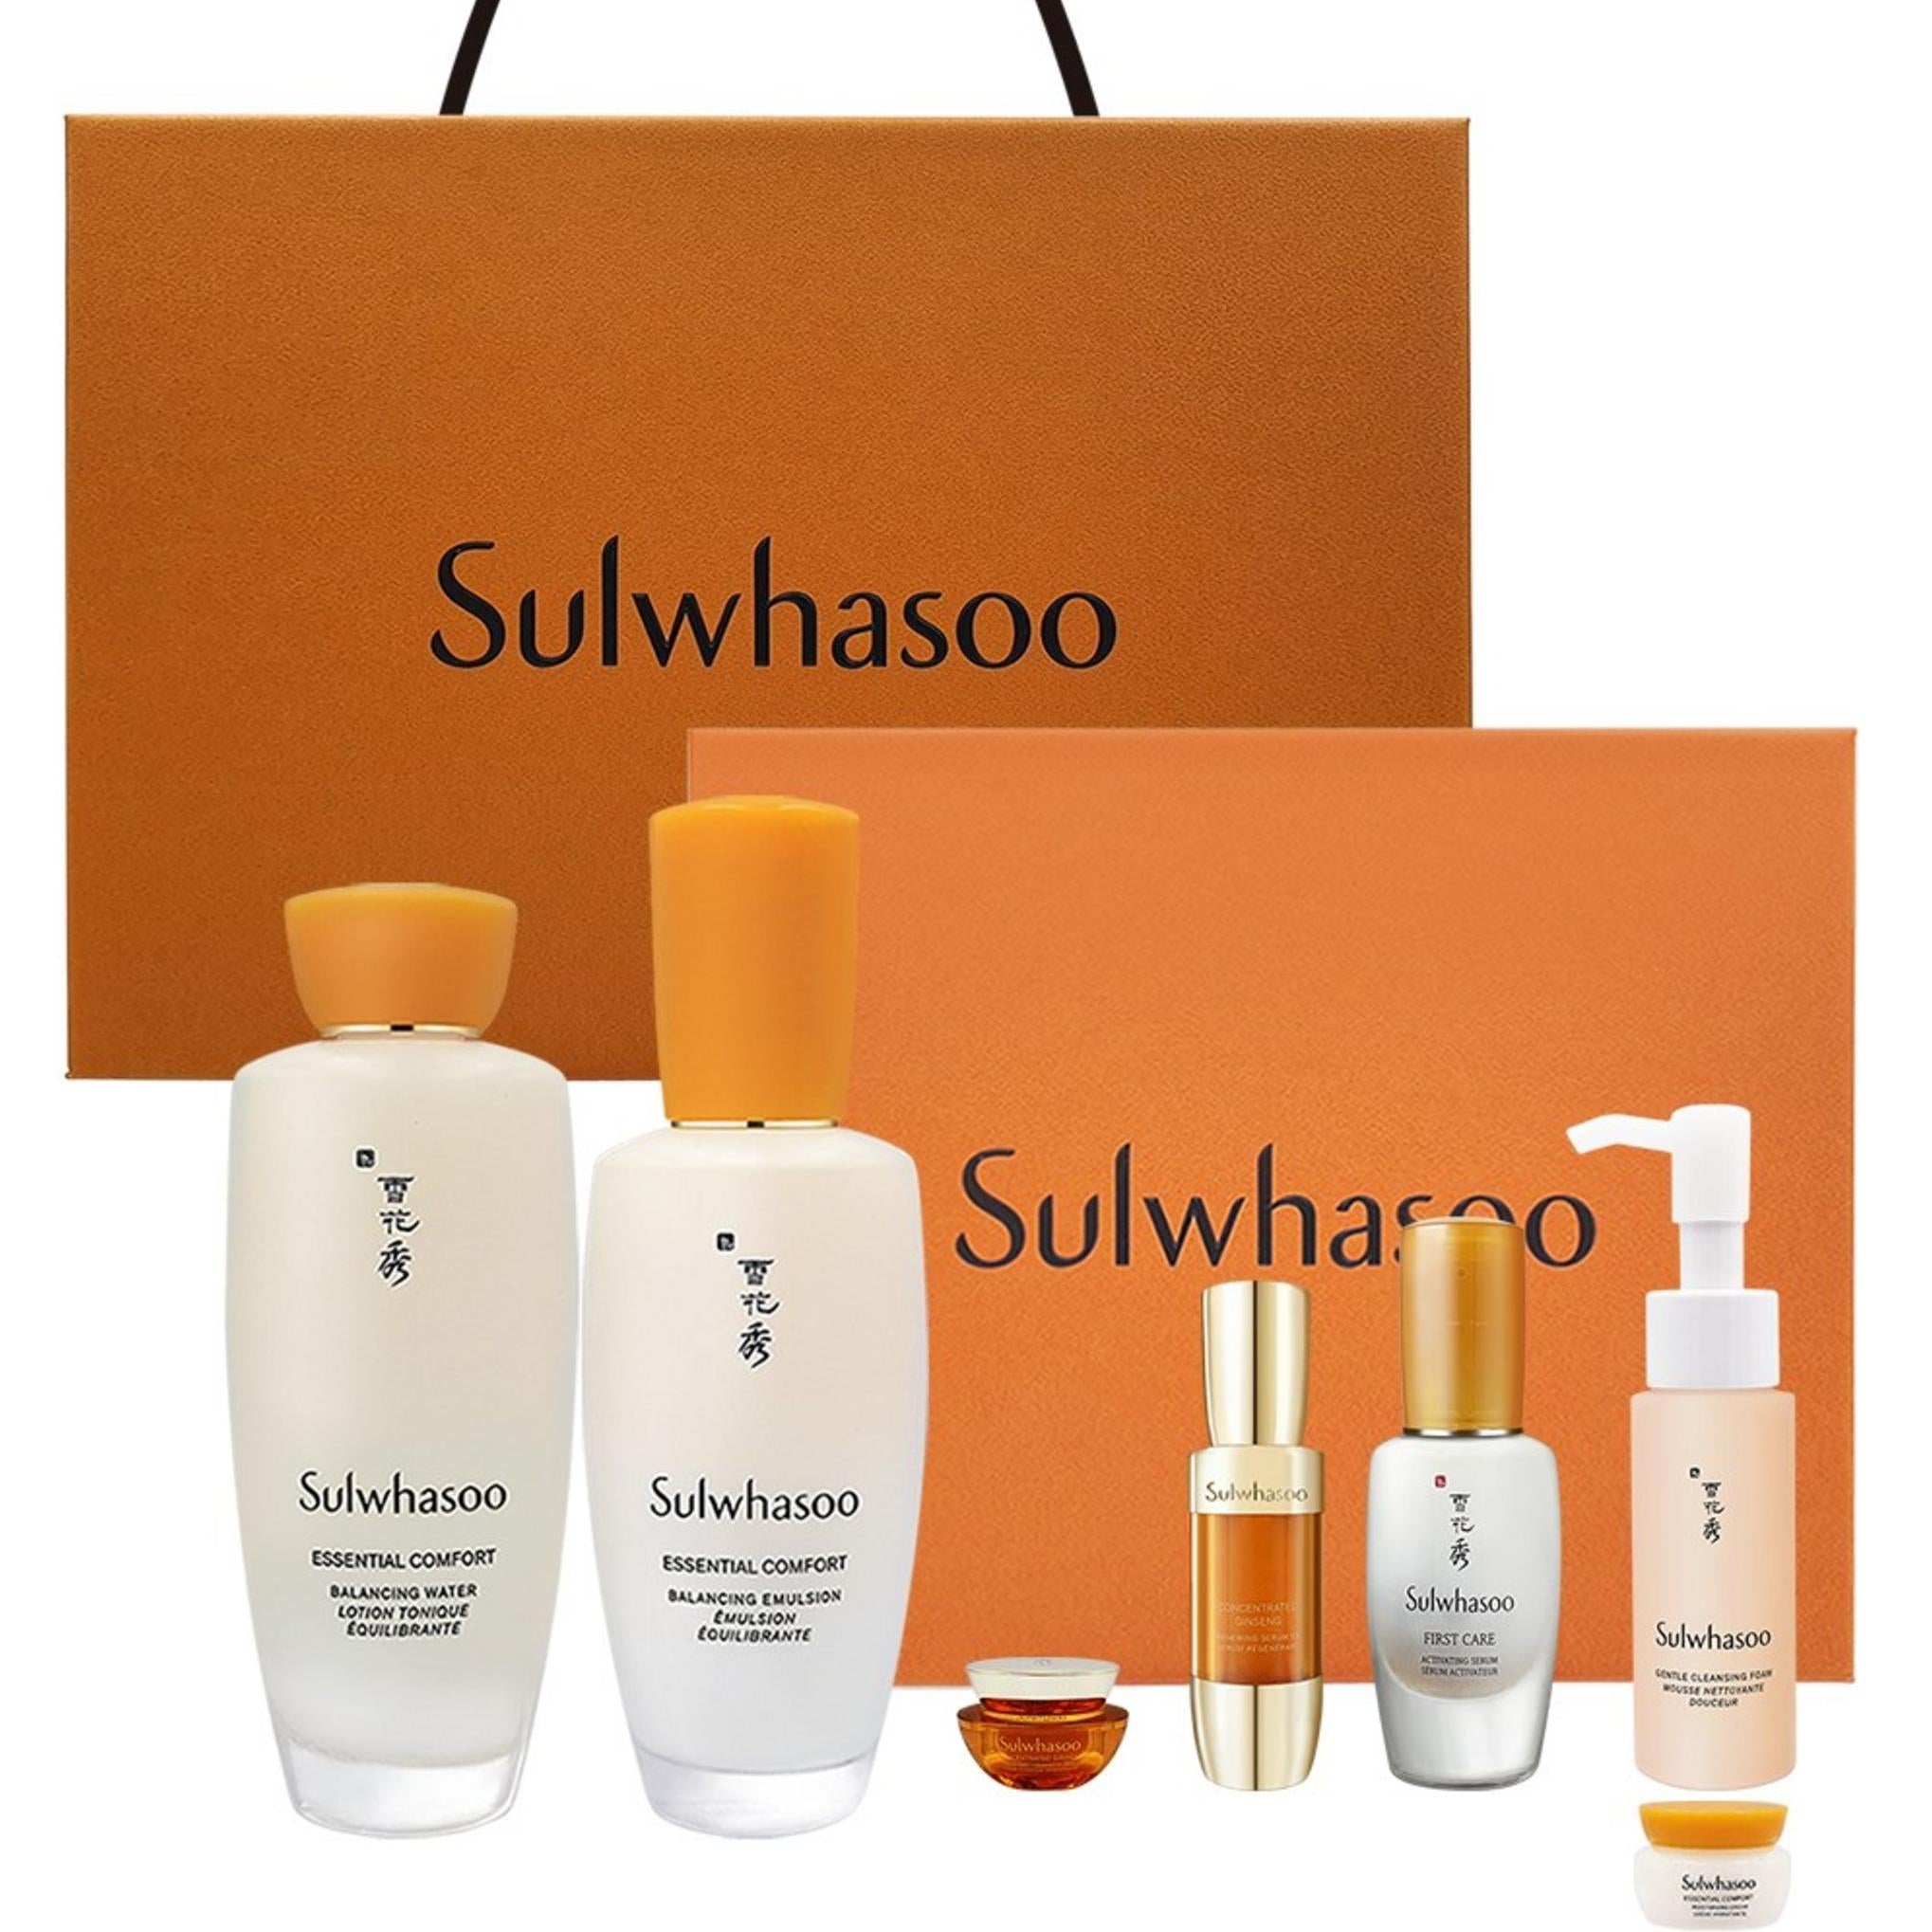 NEW Sulwhasoo Consonant 2-piece set with shopping bag (Concentrated Ginseng Renewing Serum 8ml Concentrated Ginseng Renewing Cream Classic 5ml Gentle Cleansing Foam 50ml Firming Cream 5ml)